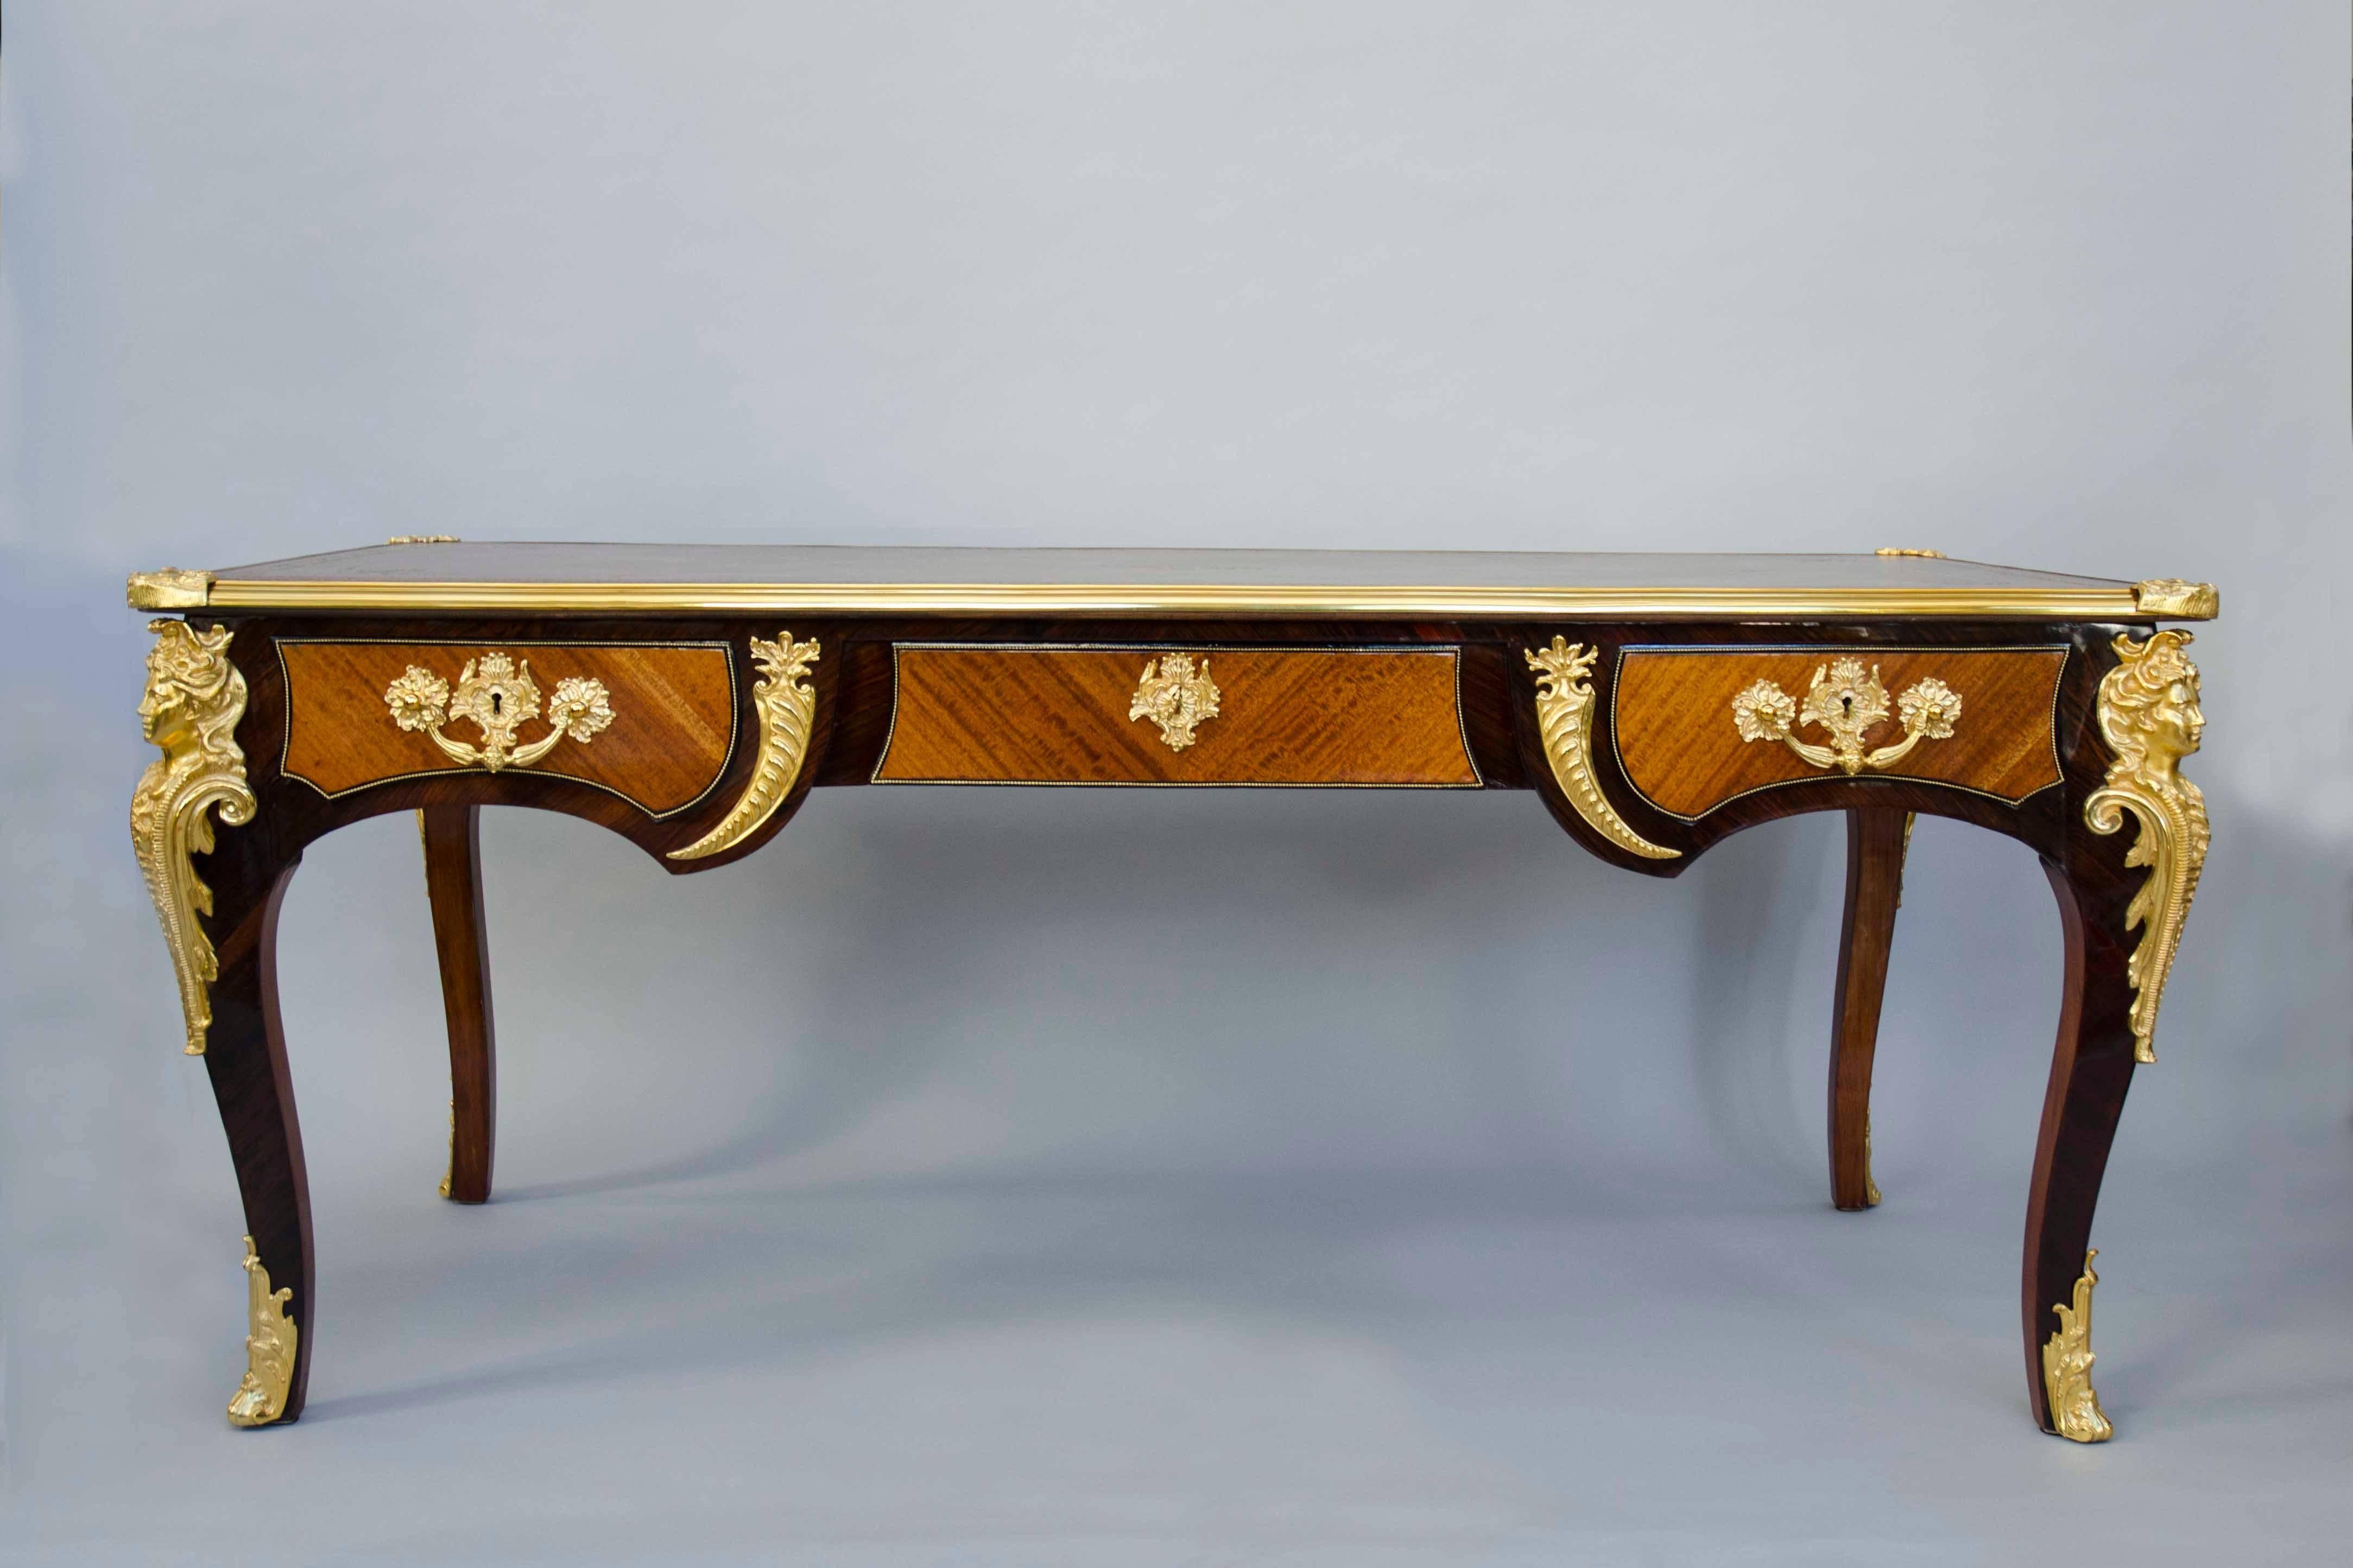 Large and beautiful Regence style desk called 